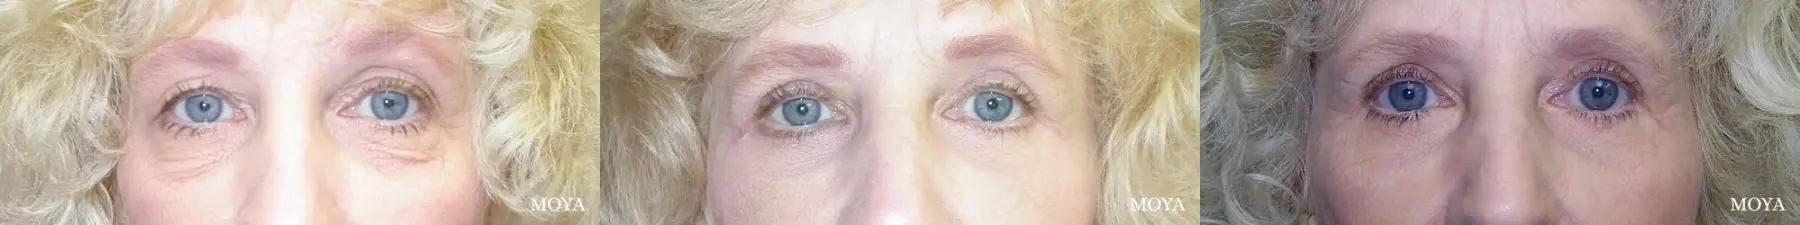 Eyelid Lift: Patient 5 - Before and After 1